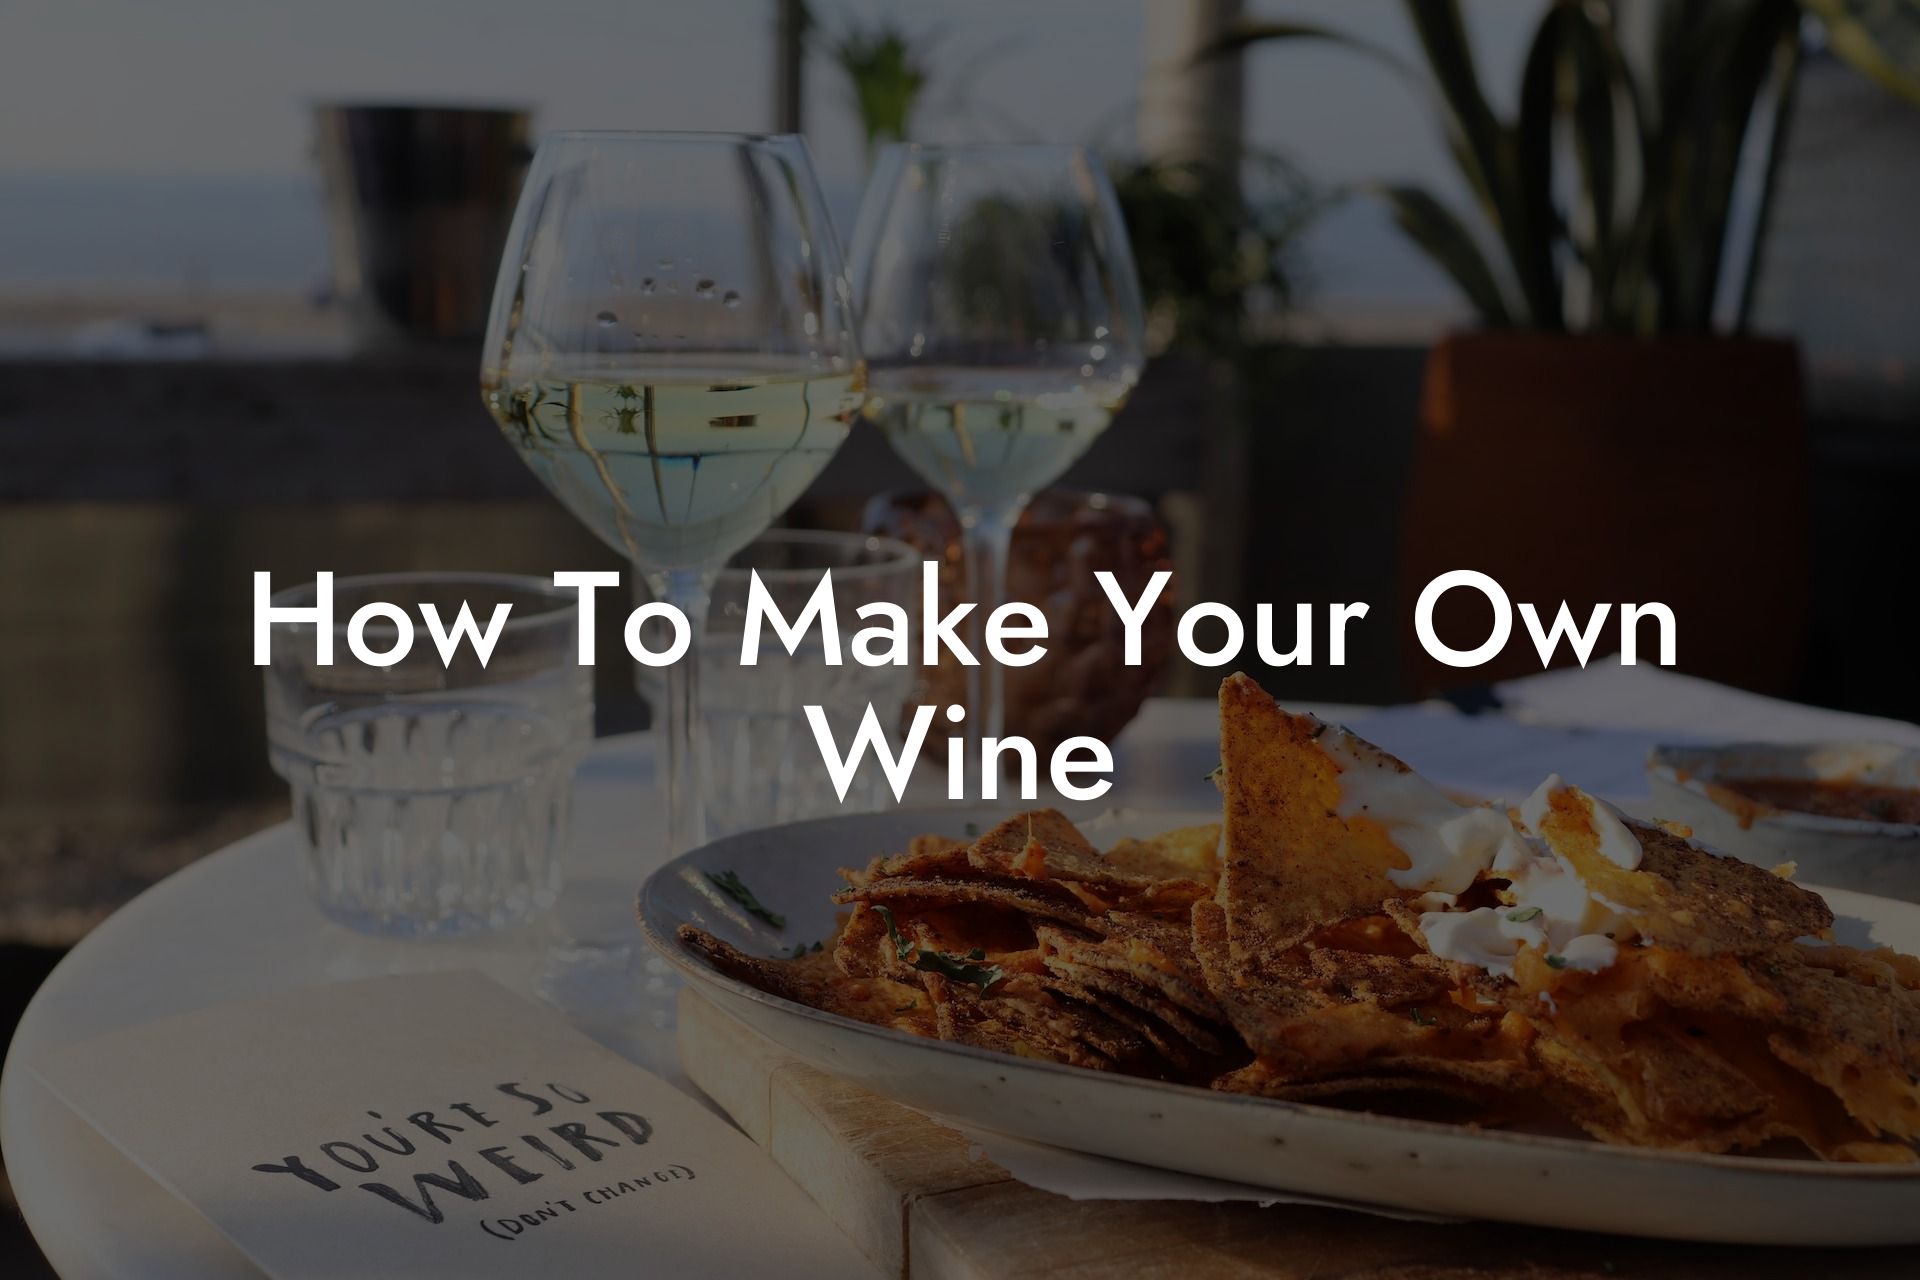 How To Make Your Own Wine